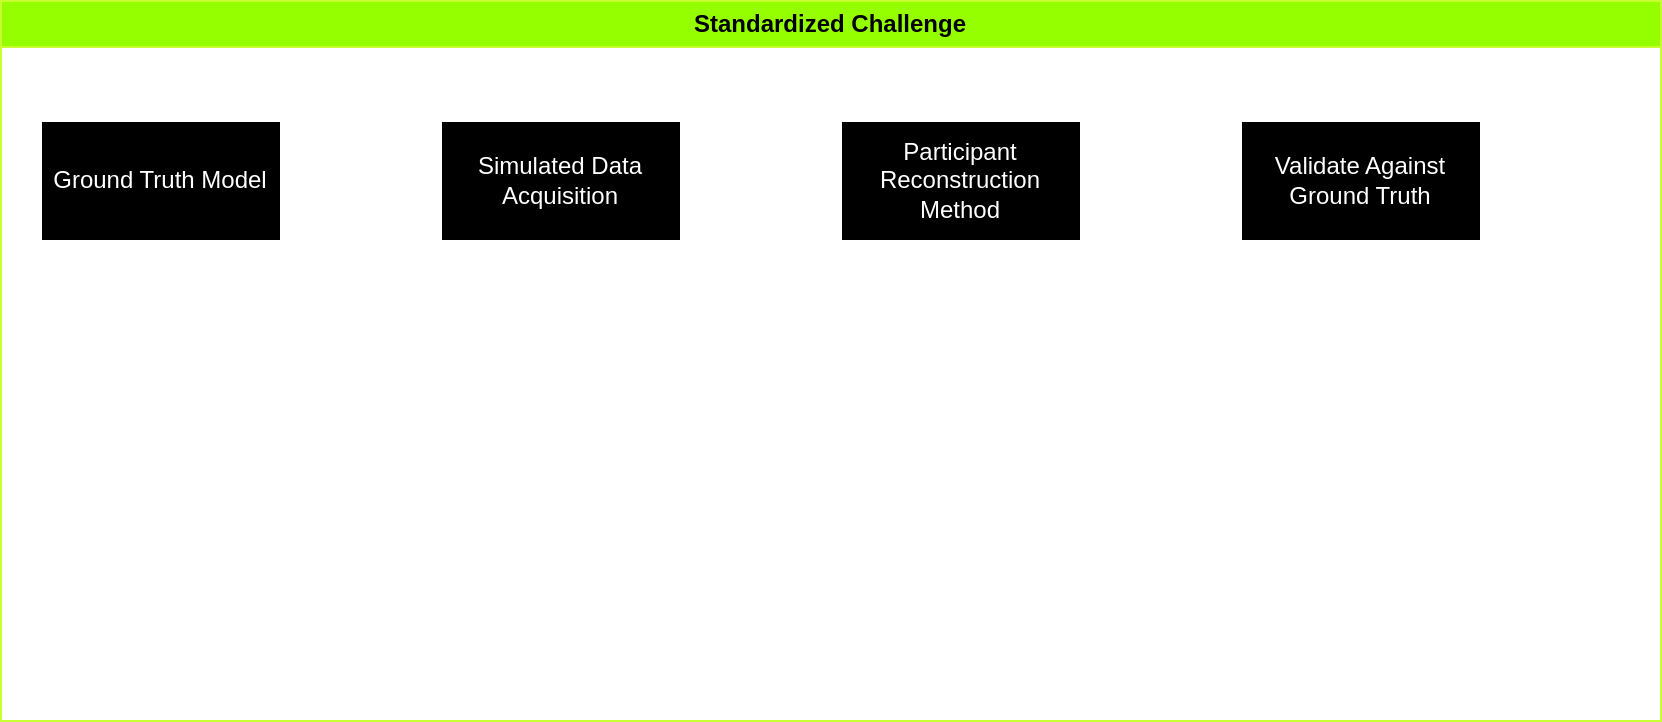 Standardized Challenge Overview